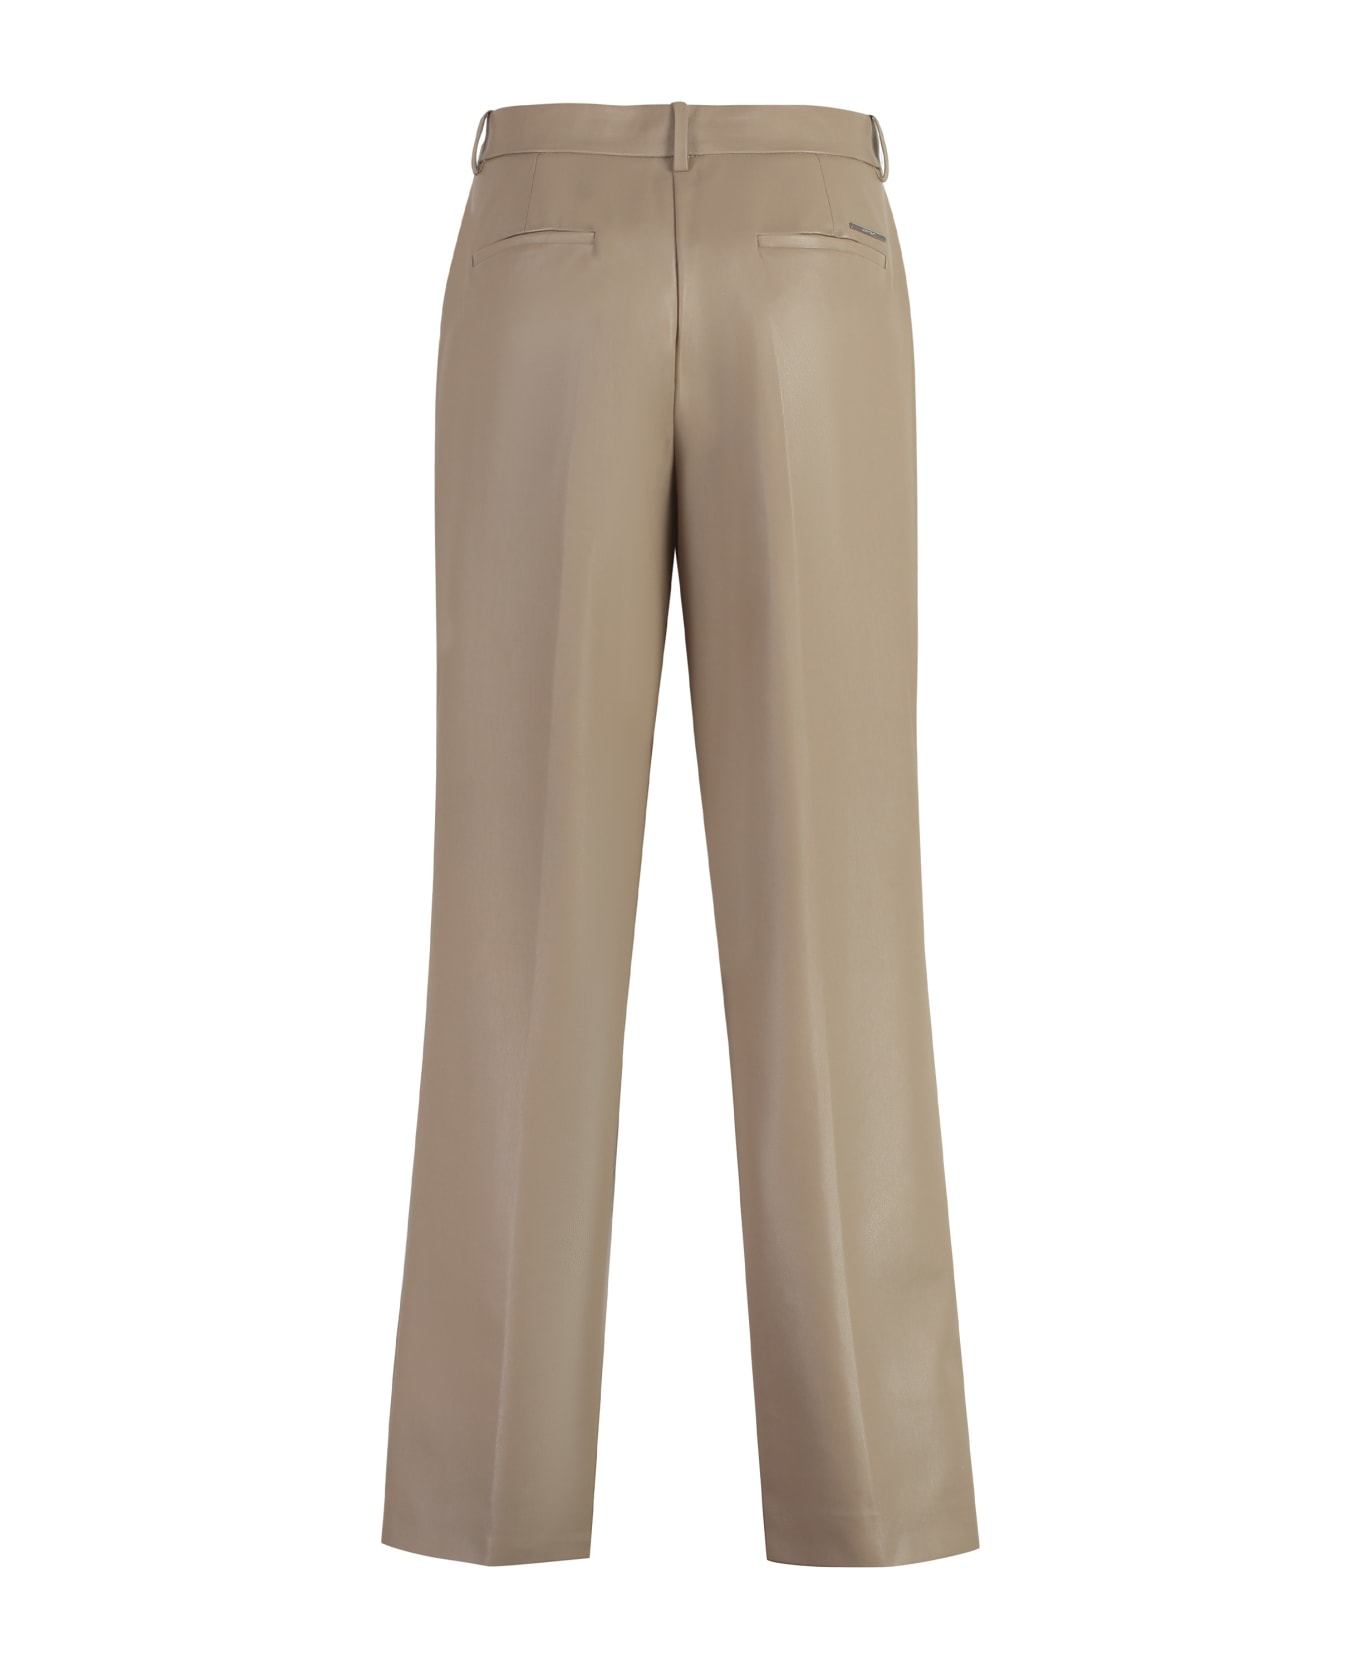 Calvin Klein Faux Leather Trousers - Neutral Taupe